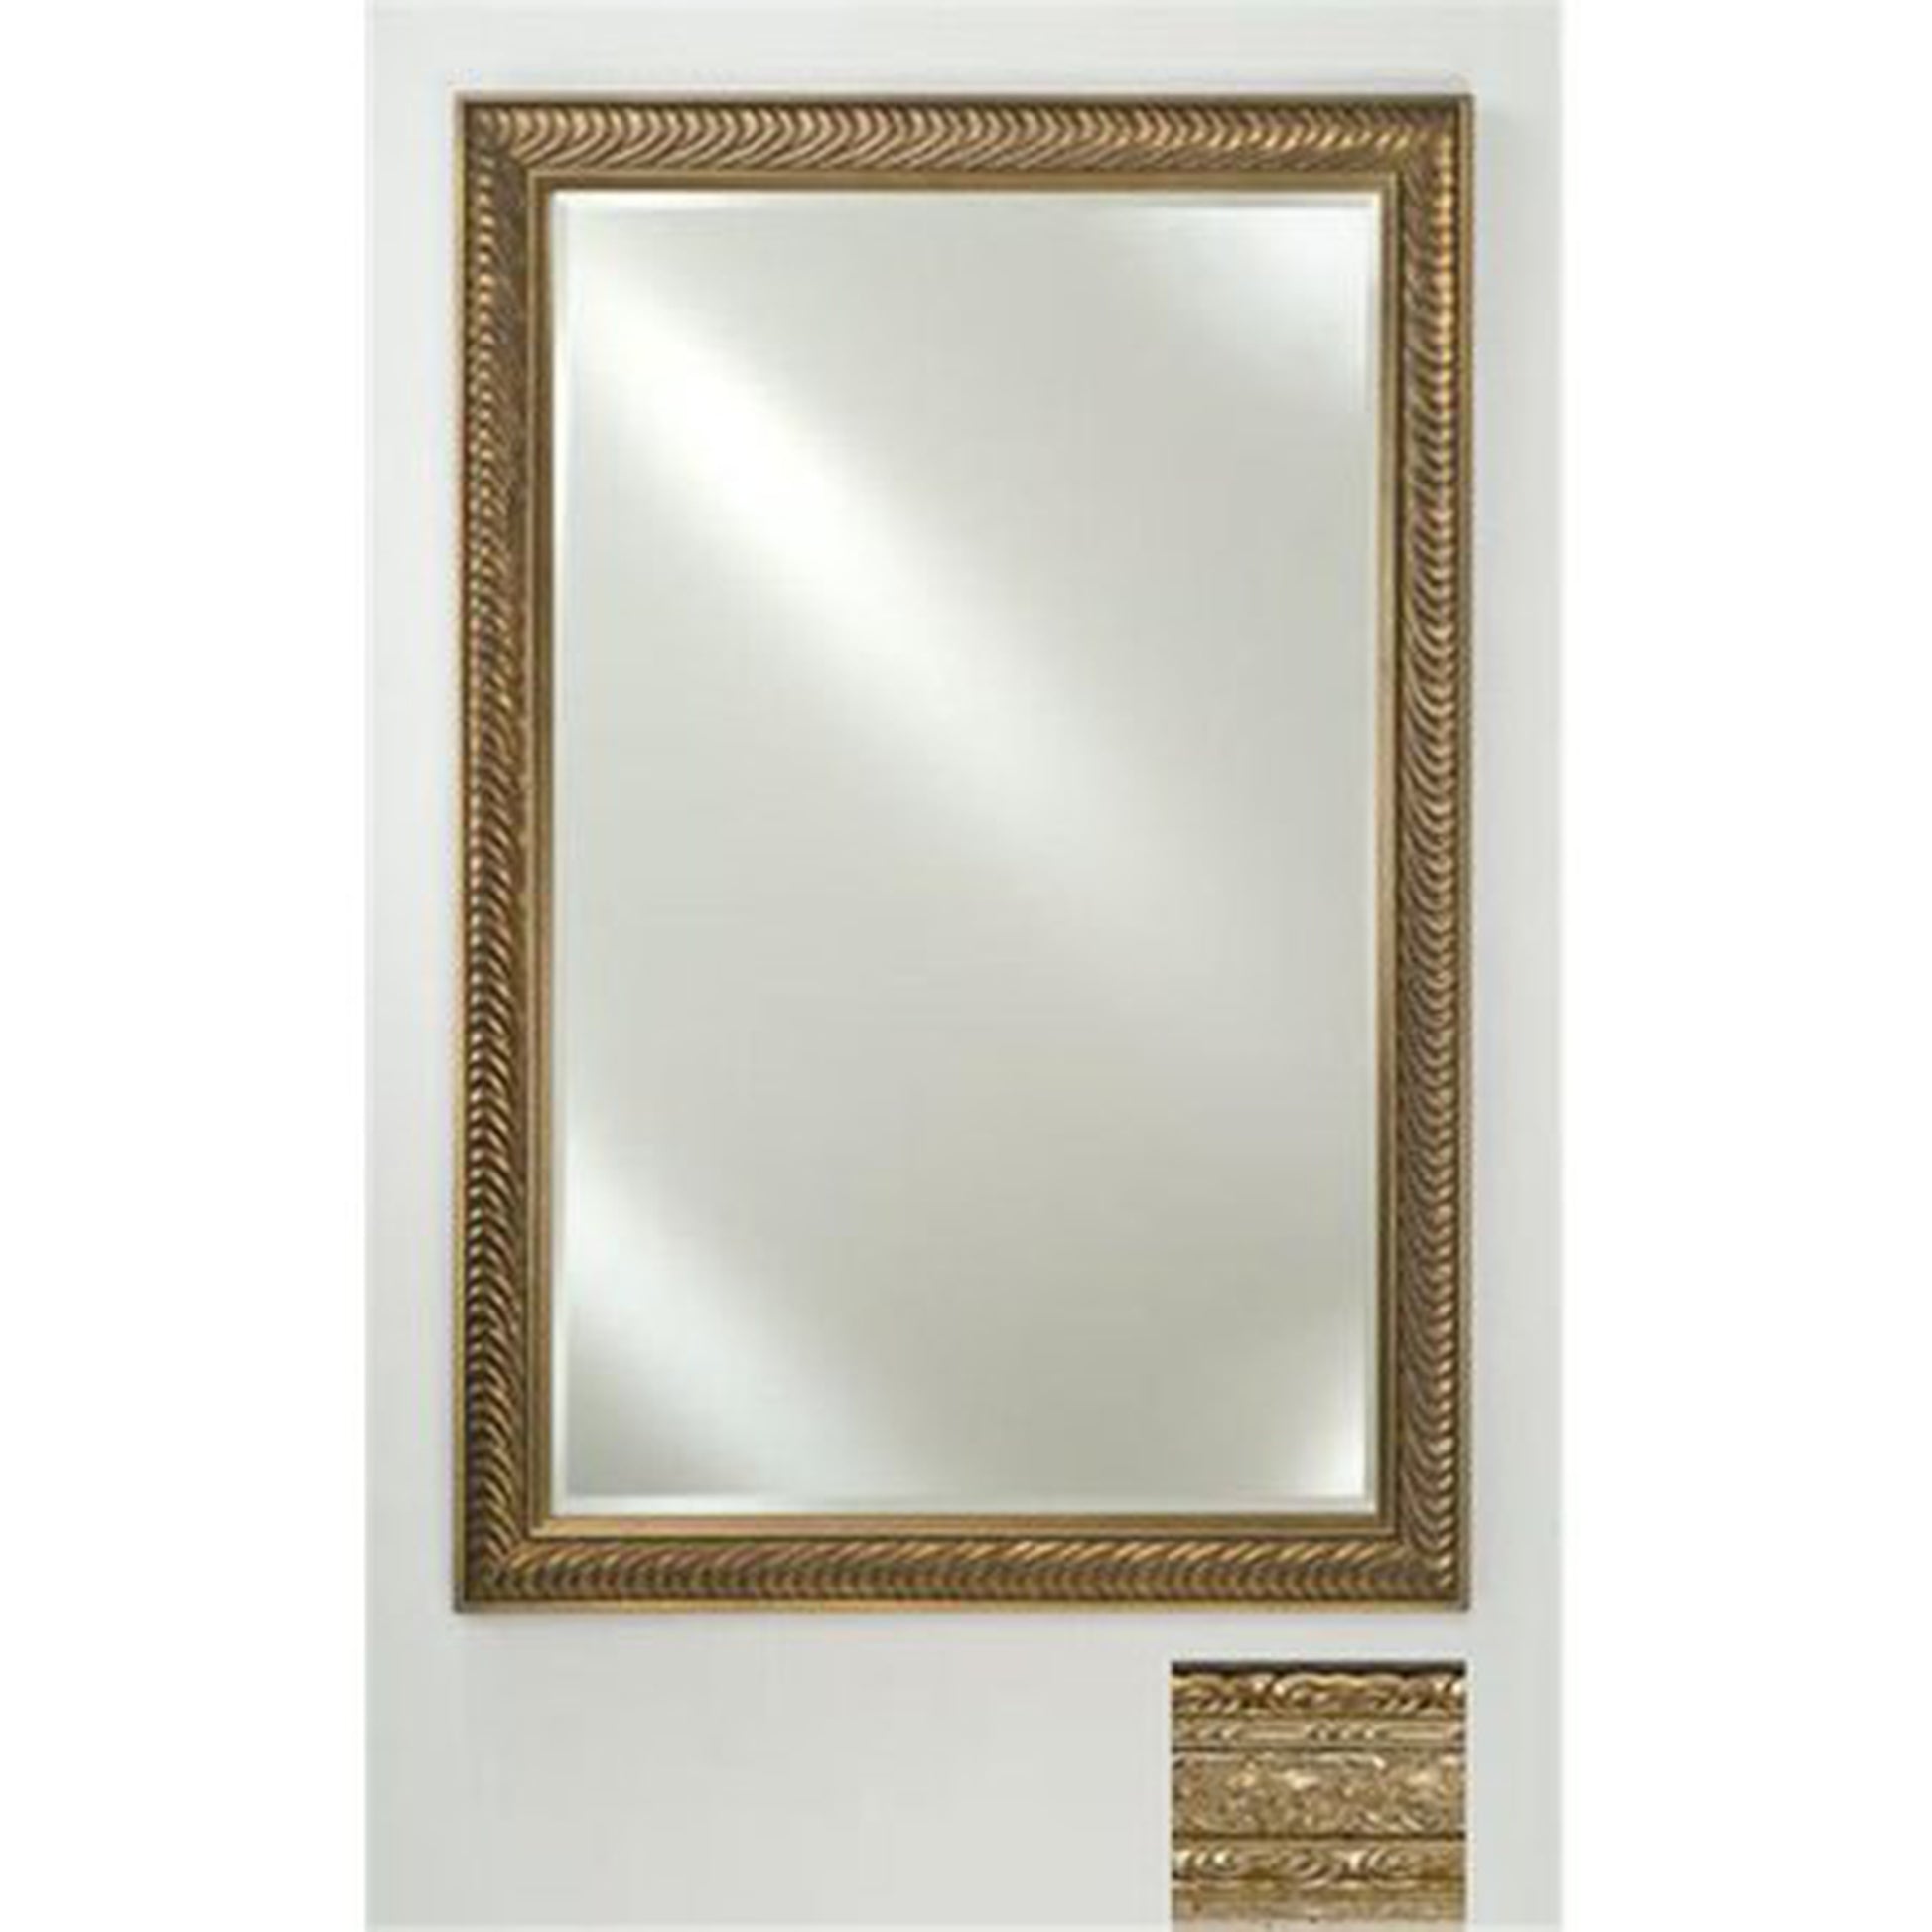 Afina Signature 16" x 22" Regal Antique Silver Framed Mirror With Beveled Edge